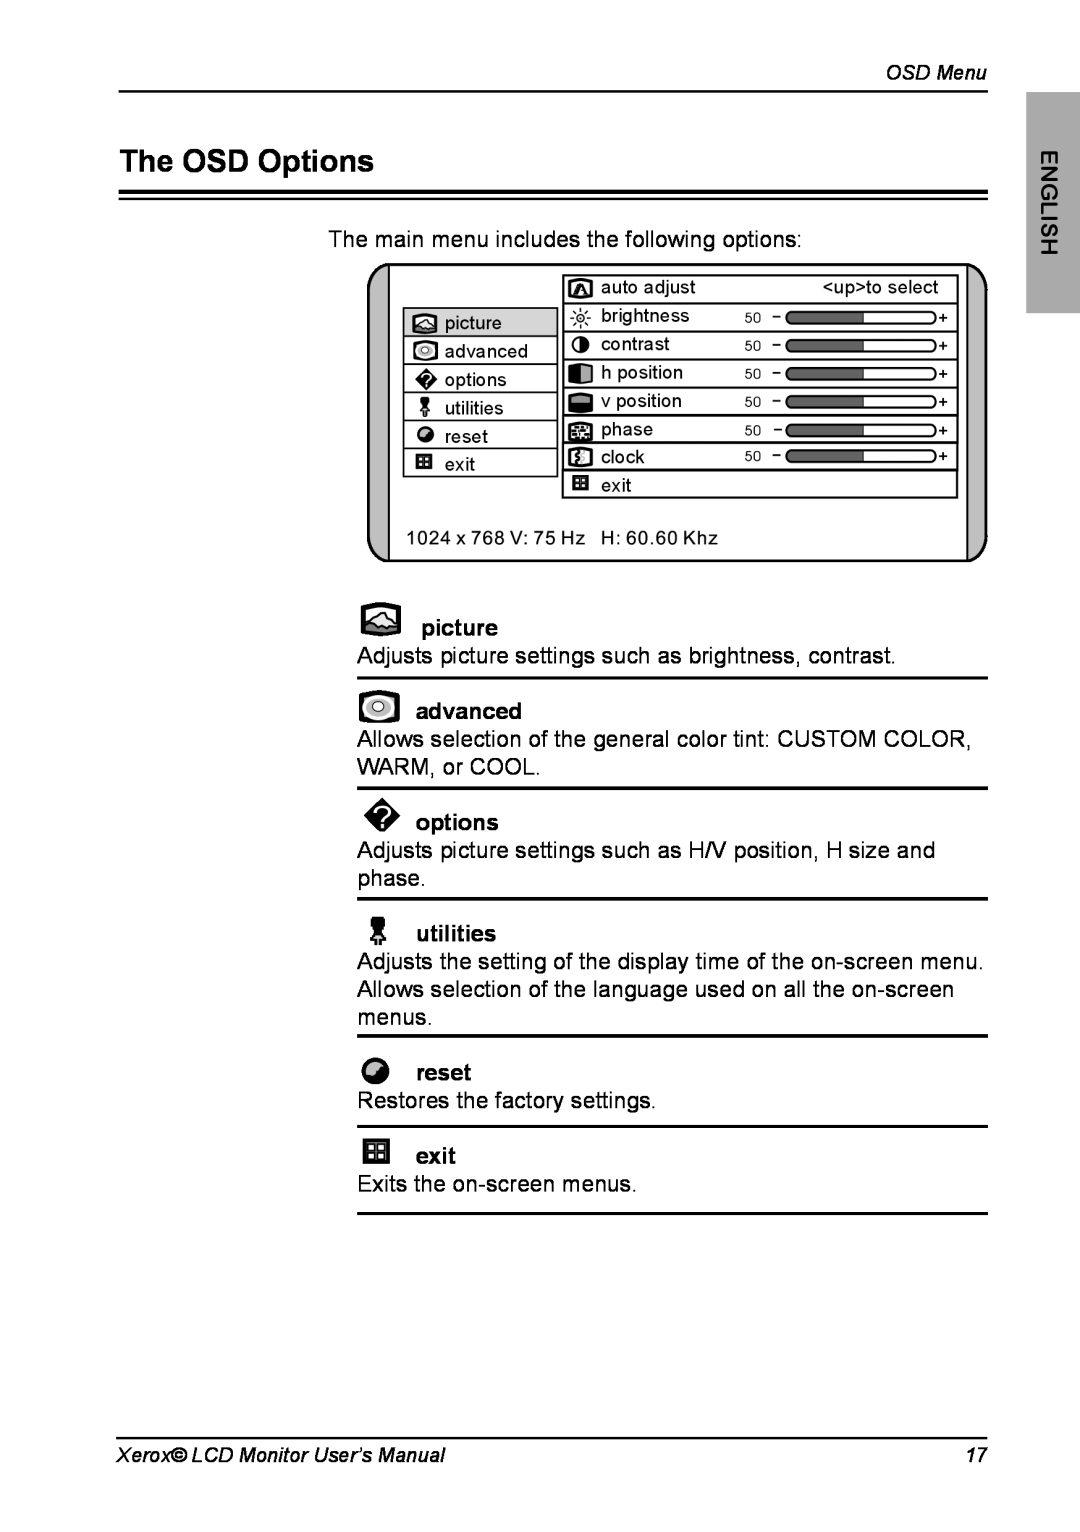 Xerox XR6 Series manual The OSD Options, picture, advanced, options, utilities, reset, exit, English 